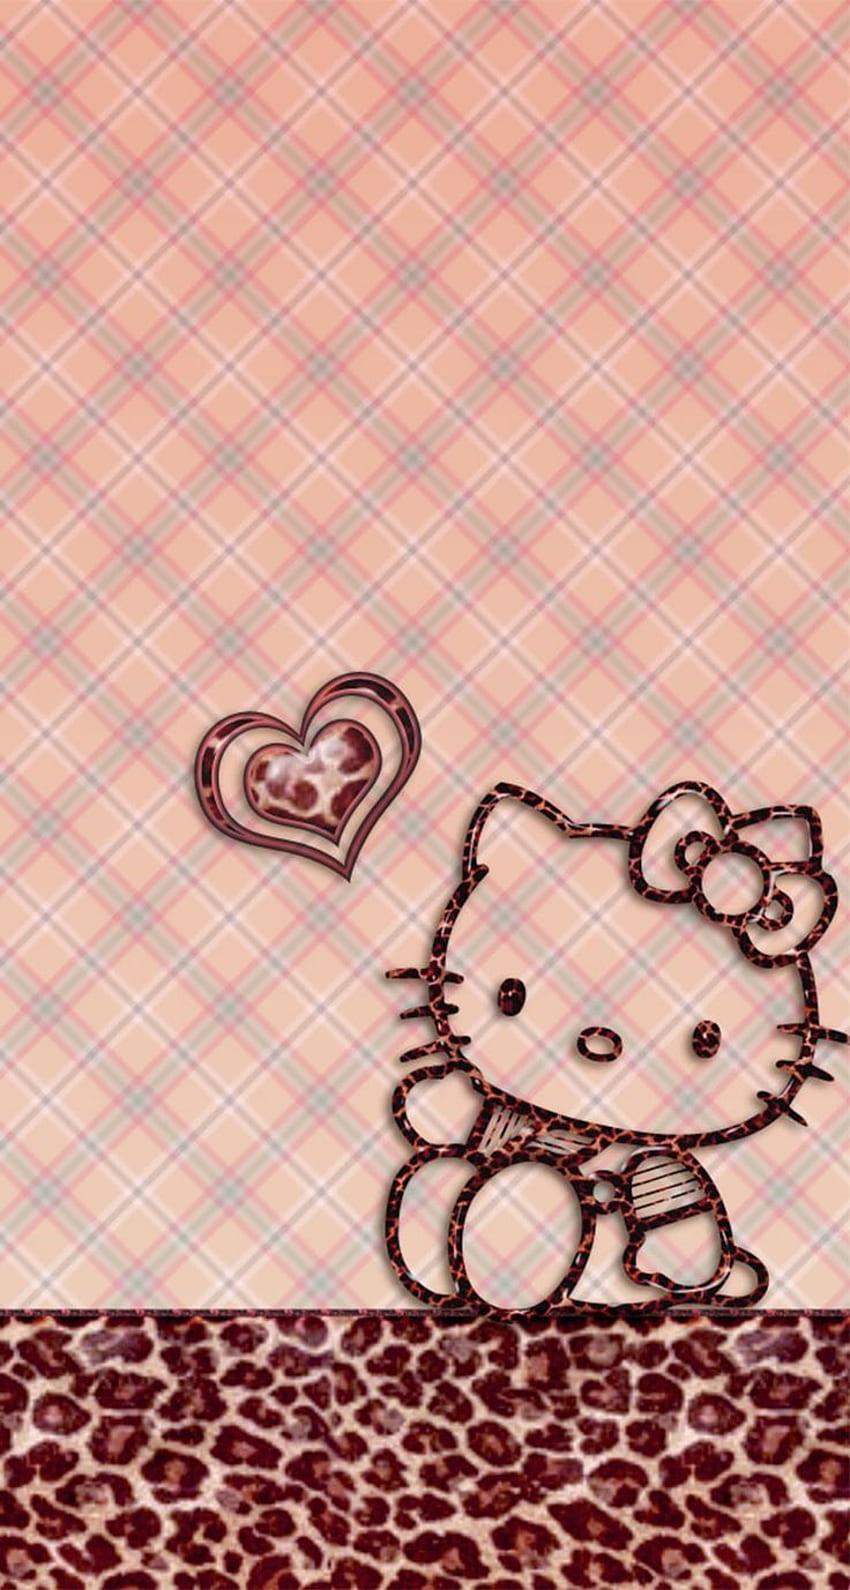 New Ty'ty on Anna Frozen., Bow., Hearts., Love., Magical., Glitters.,  Dream., Chanel. . Hello kitty , Melody hello kitty, Hello kitty, Hello Kitty  Cute HD phone wallpaper